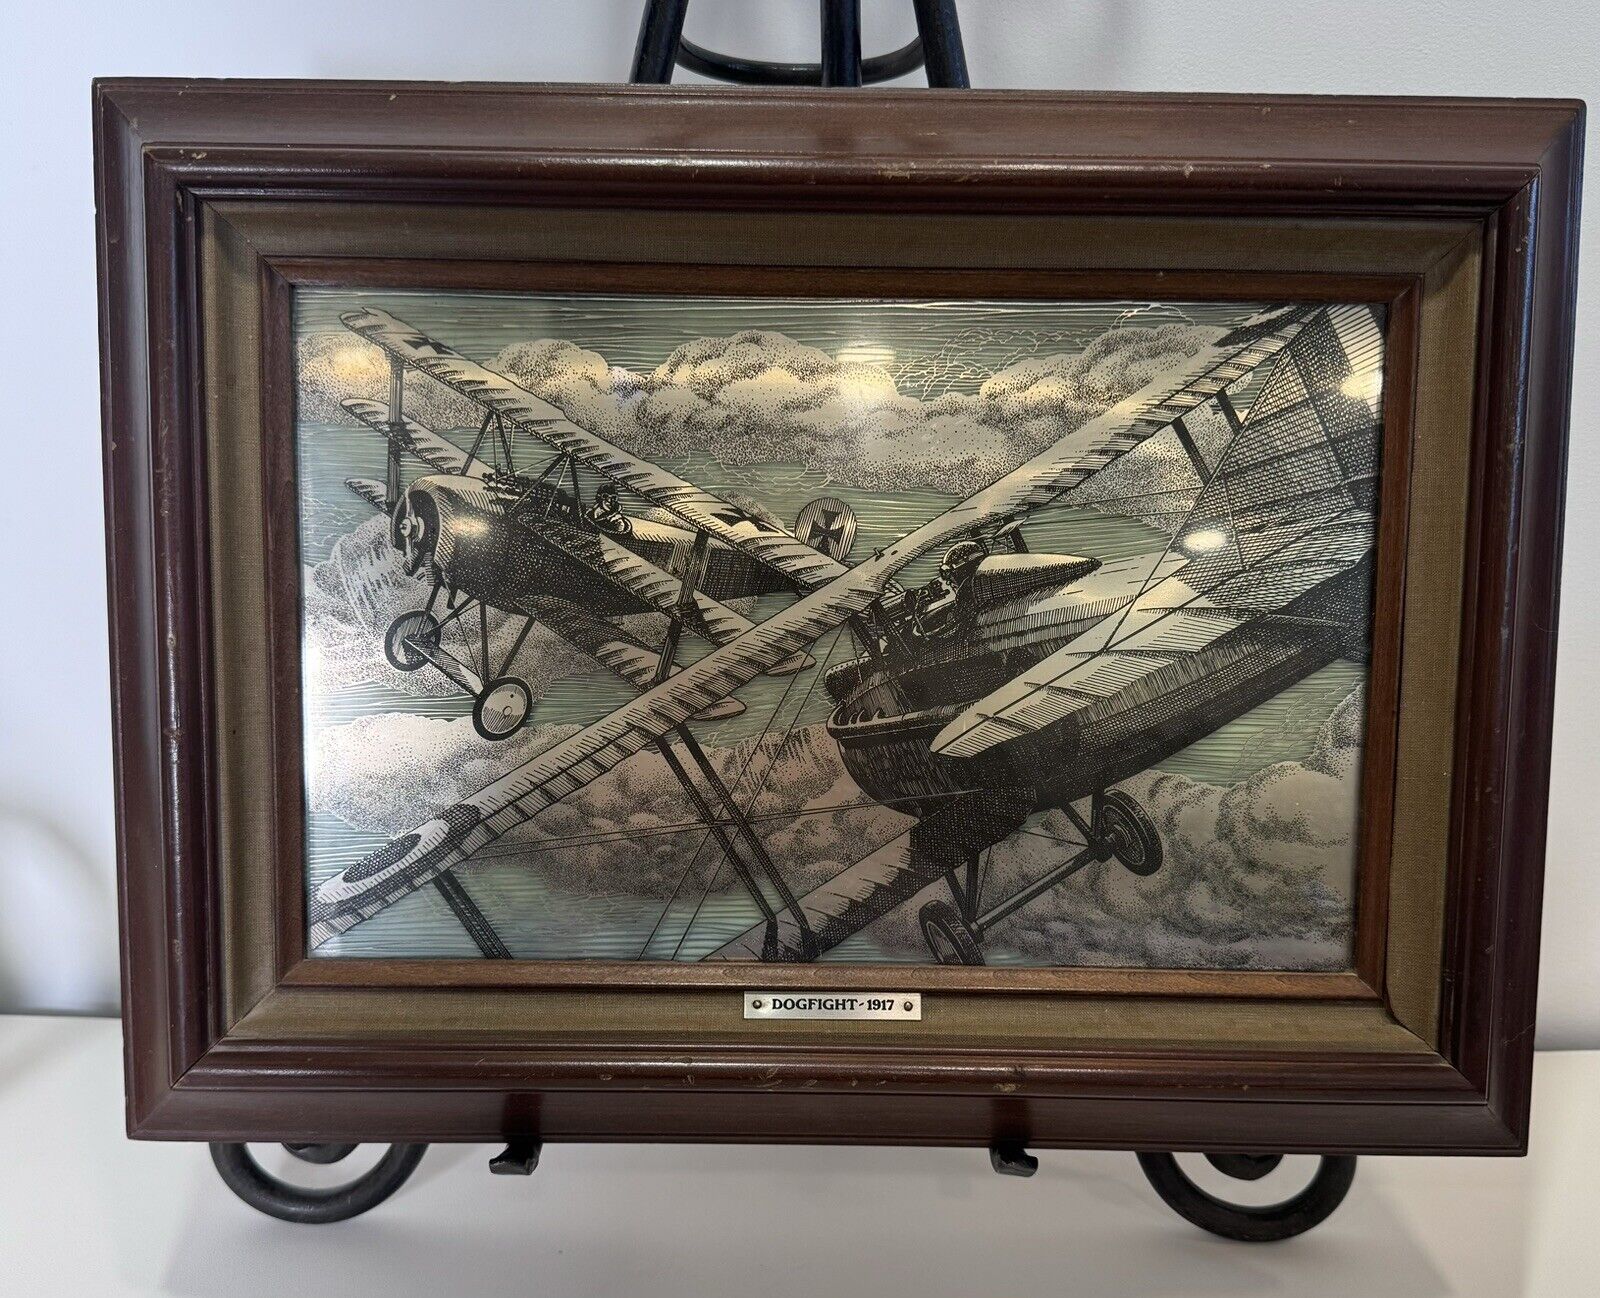 Dogfight WWI Wall Art Etched Sterling Franklin Mint - HD2 Fighter Planes 1917